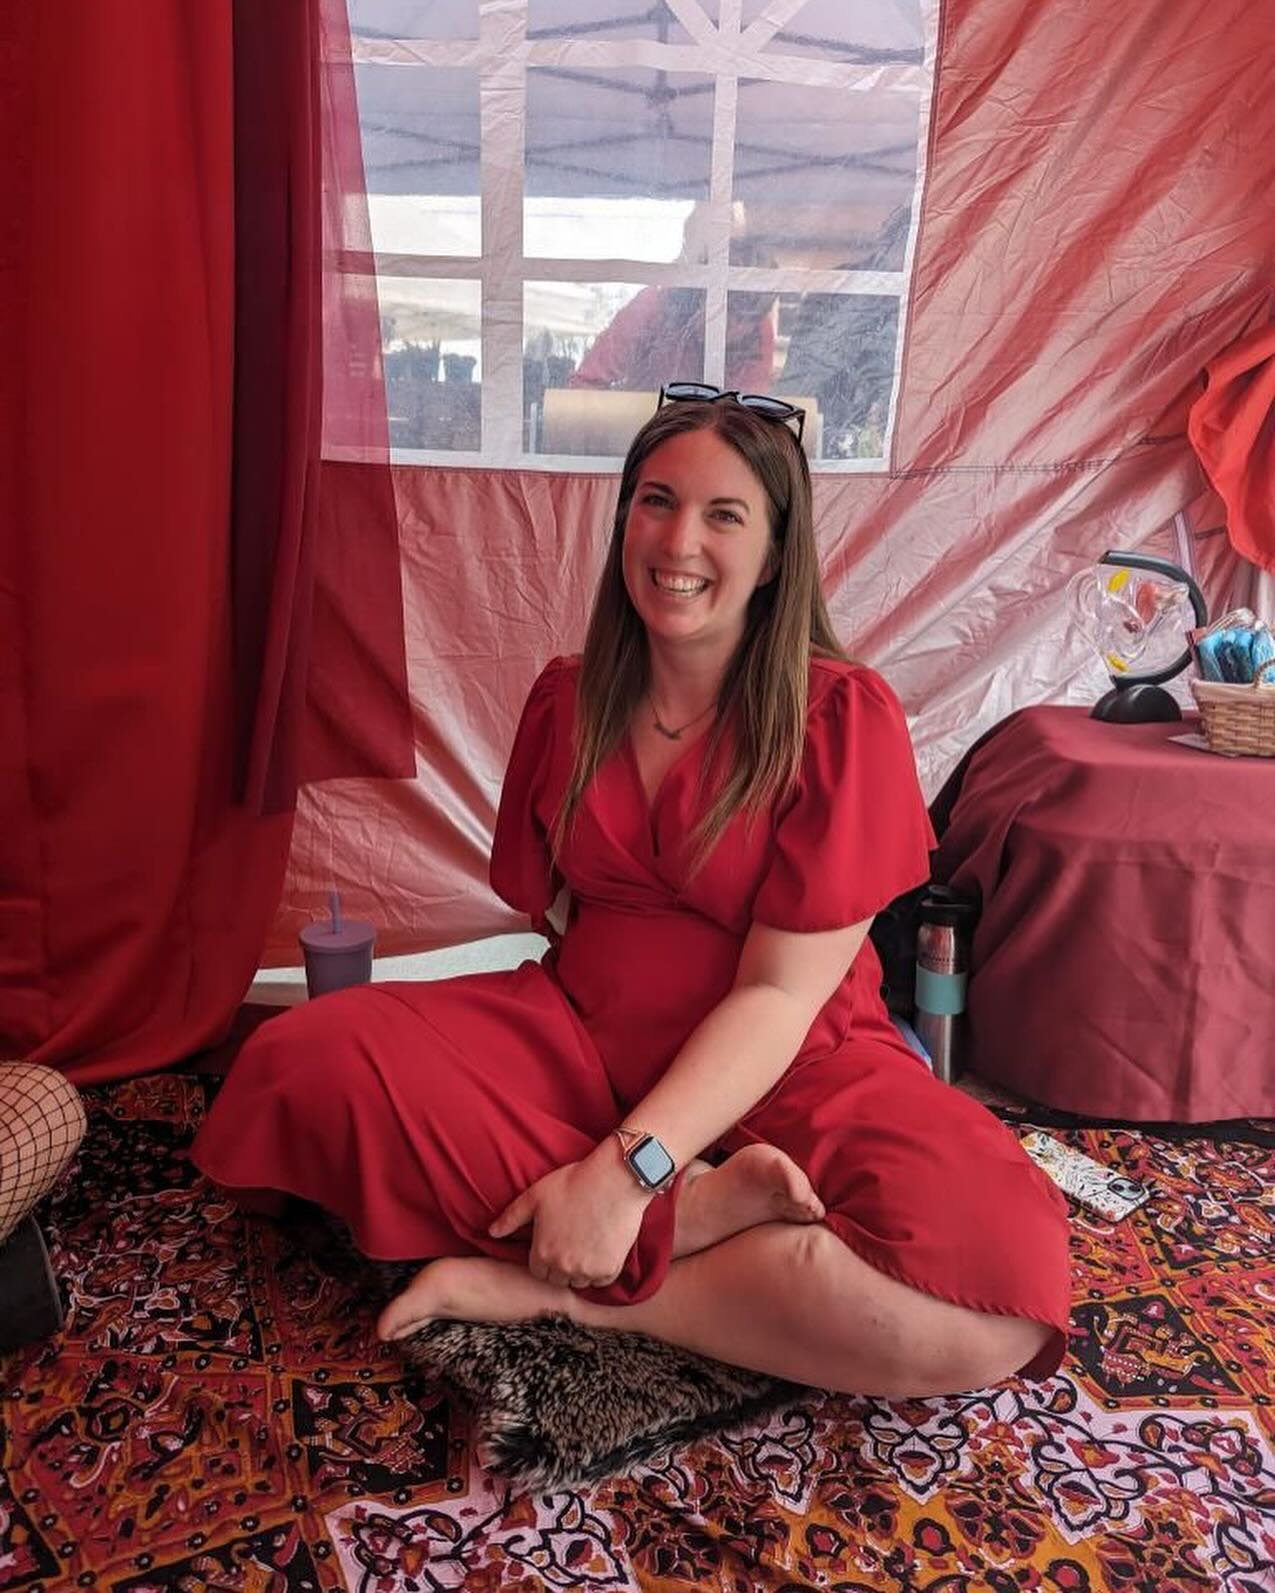 Thanks to everyone who came to the debut of year two with the Red Tent at @ptborfm (swipe for me in year one hehe) ❤️🩸

I&rsquo;m so so grateful for this space to share with community conversations &amp; discussions around menstruation.

Here&rsquo;